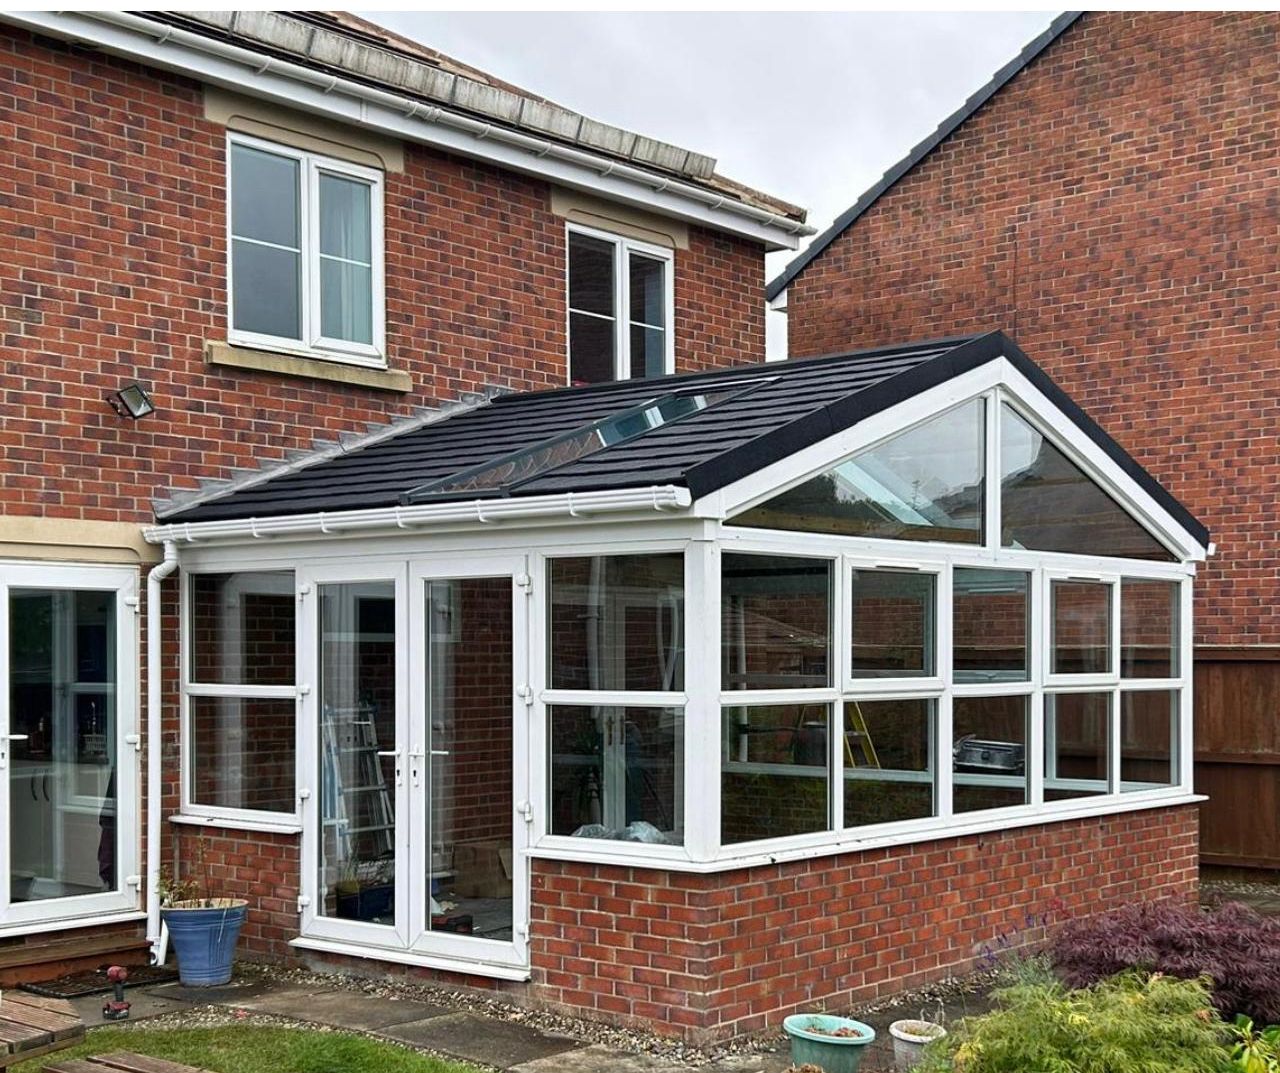 Image of a Gable-End Conservatory with a distinctive, cathedral-like ambiance, featuring a high-pitched roof and vertical front, creating a spacious and majestic interior​